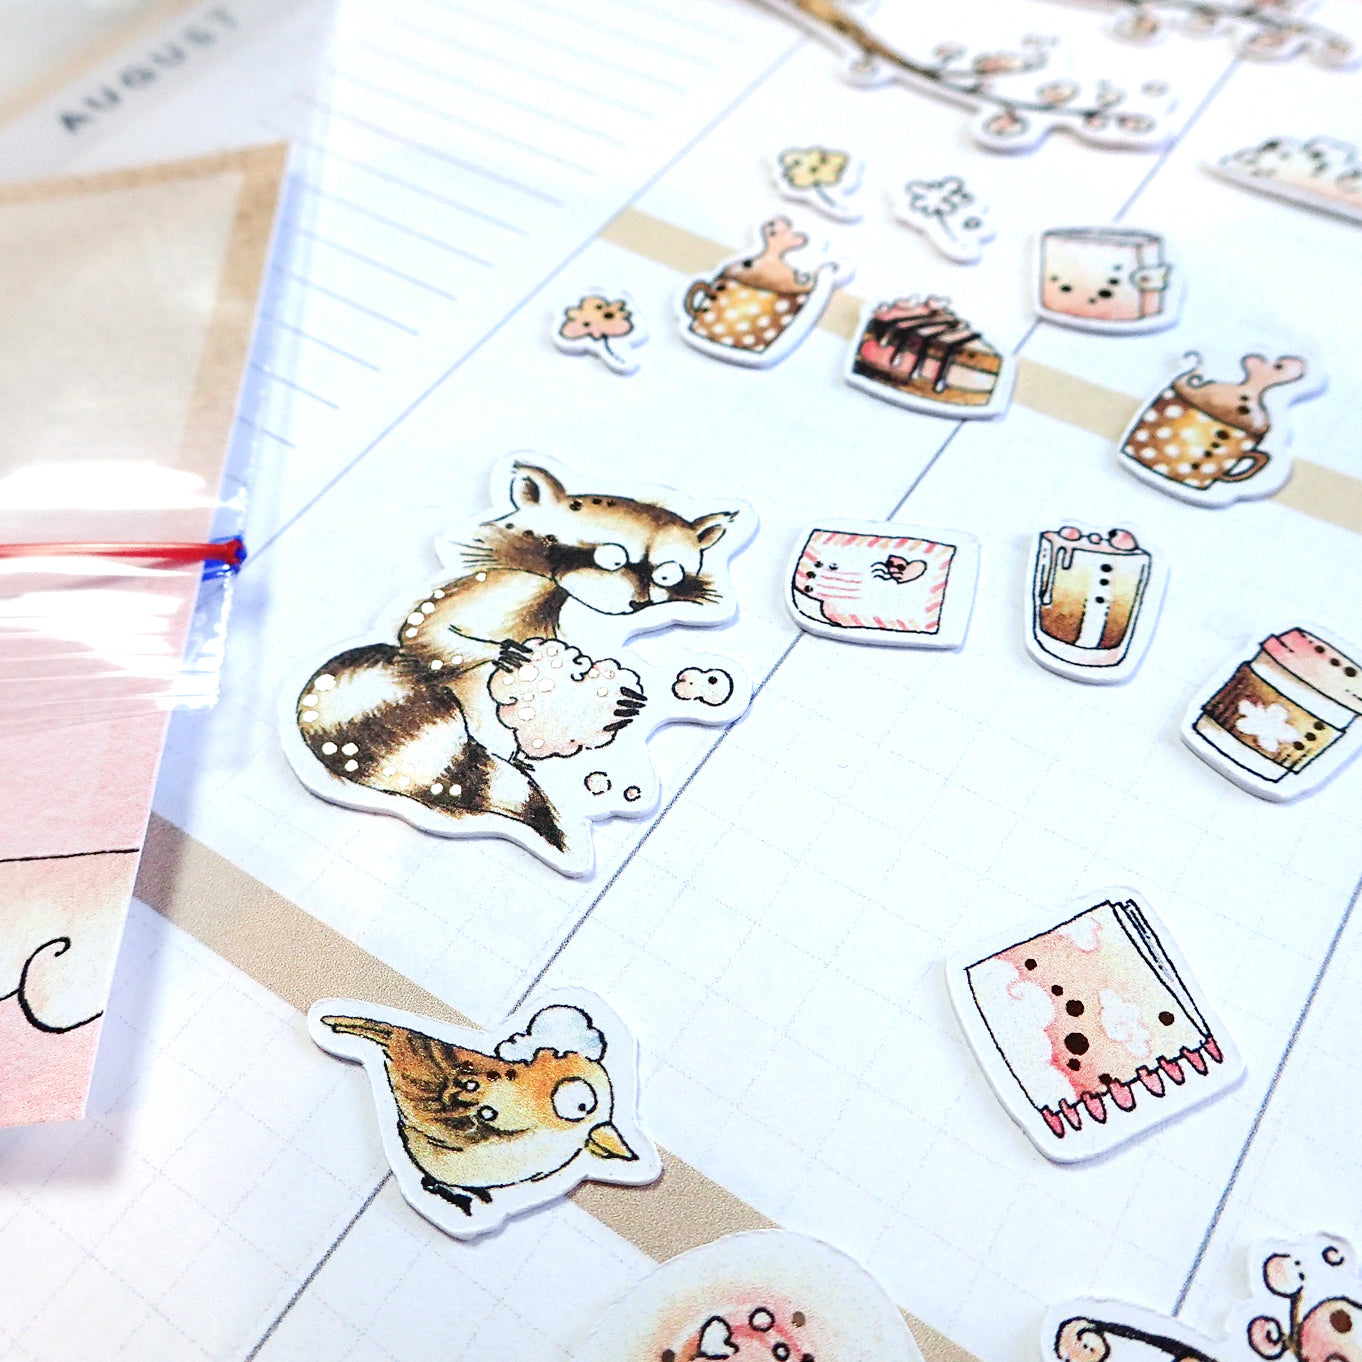 Foiled watercolor die cuts with love details inclusive raccoons